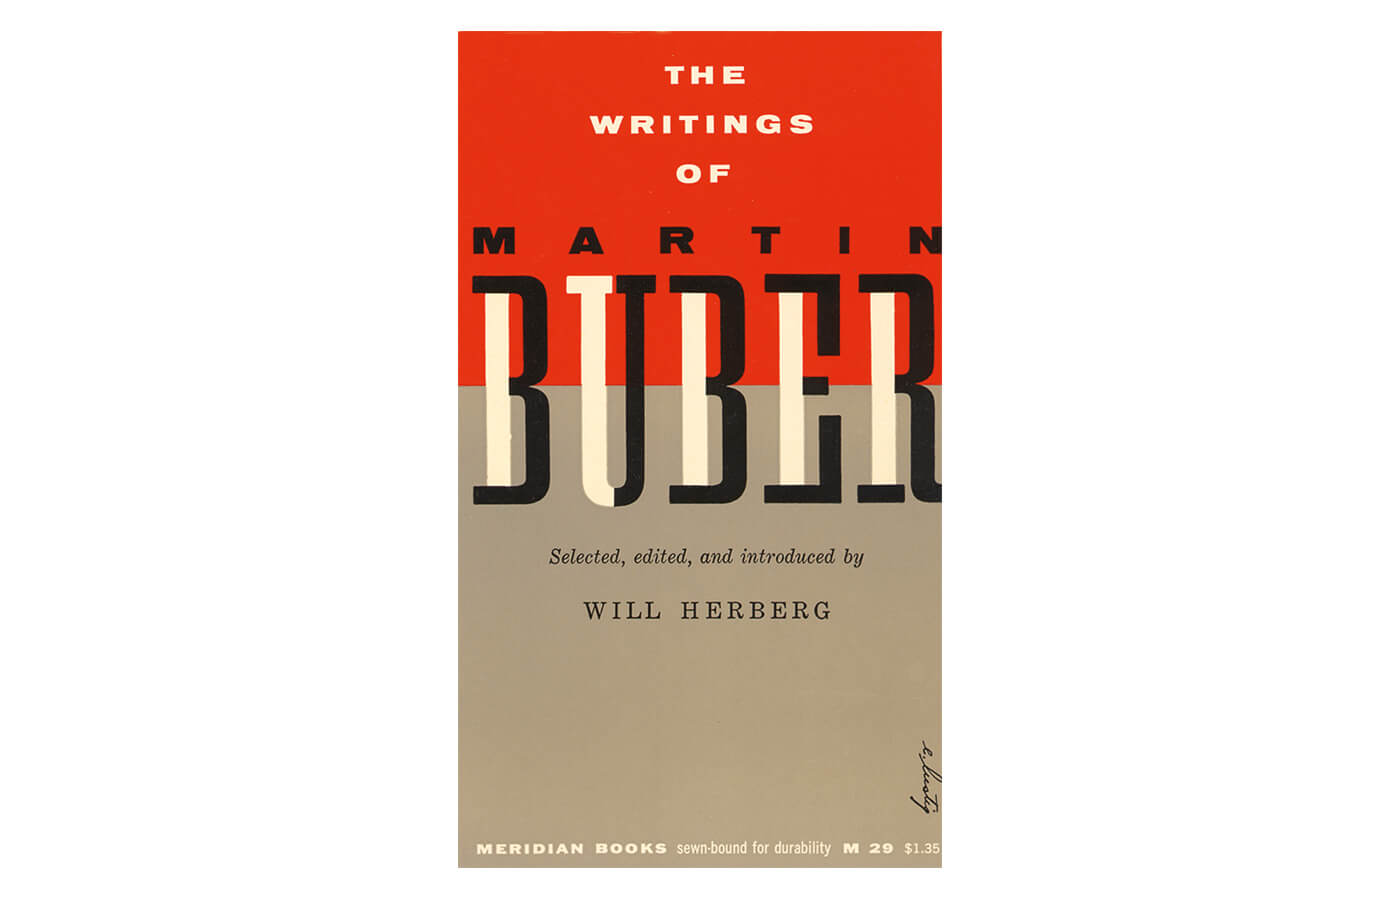 The Writings of Martin Buber